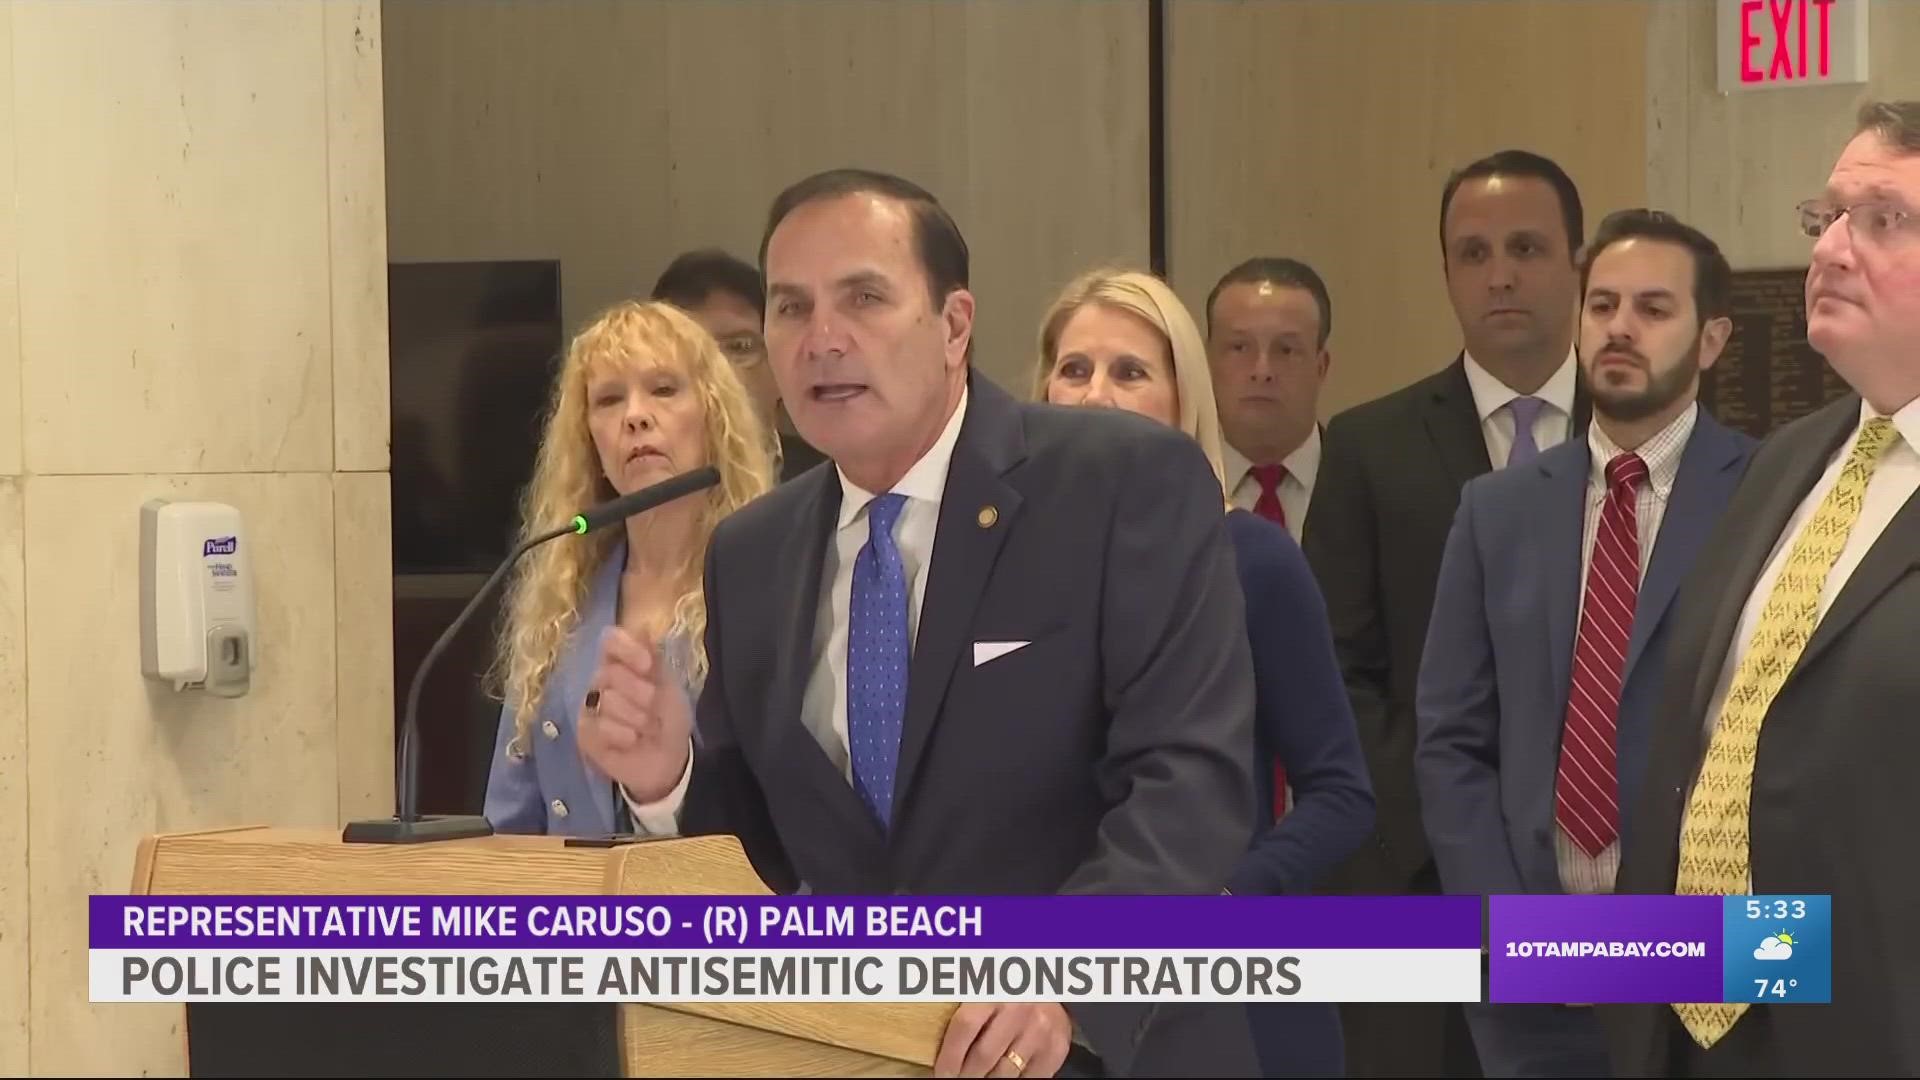 Both the Daytona Beach Police Department and the Ormond Beach Police Department released statements standing in solidarity with the Jewish community.